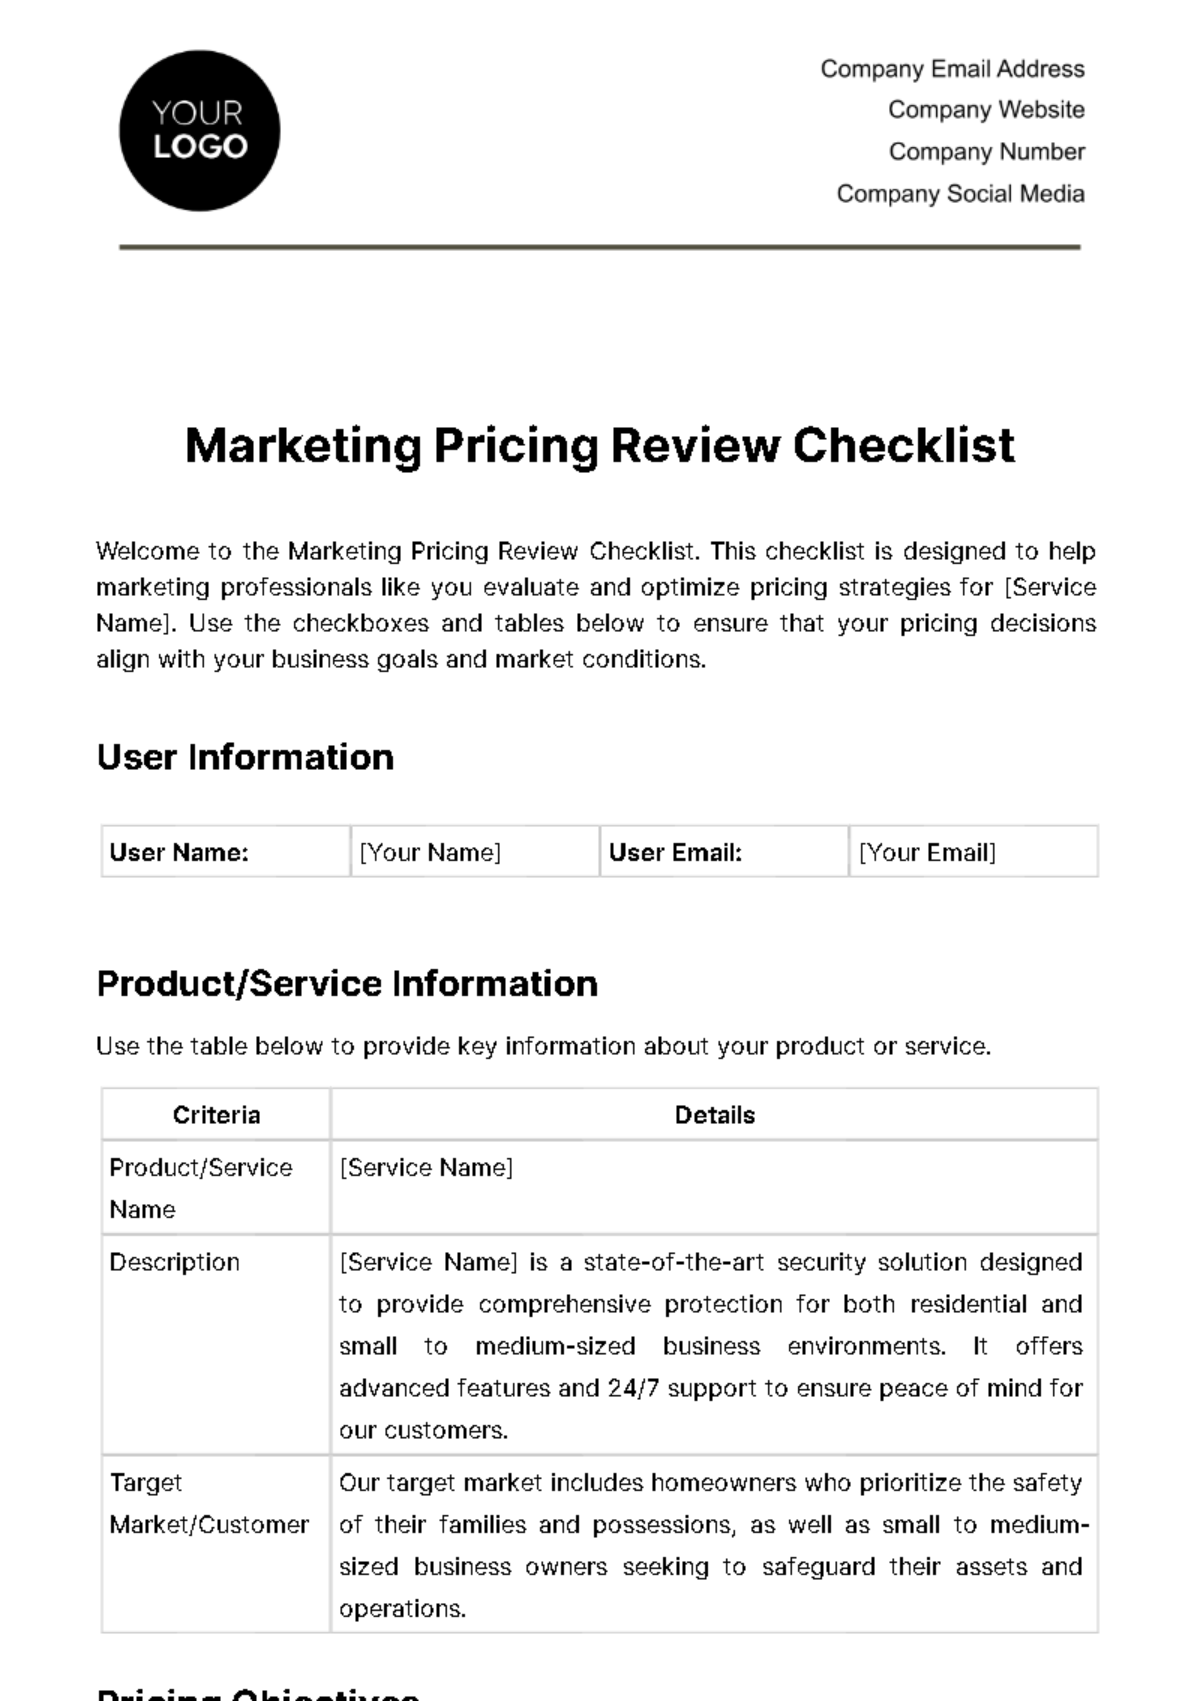 Free Marketing Pricing Review Checklist Template